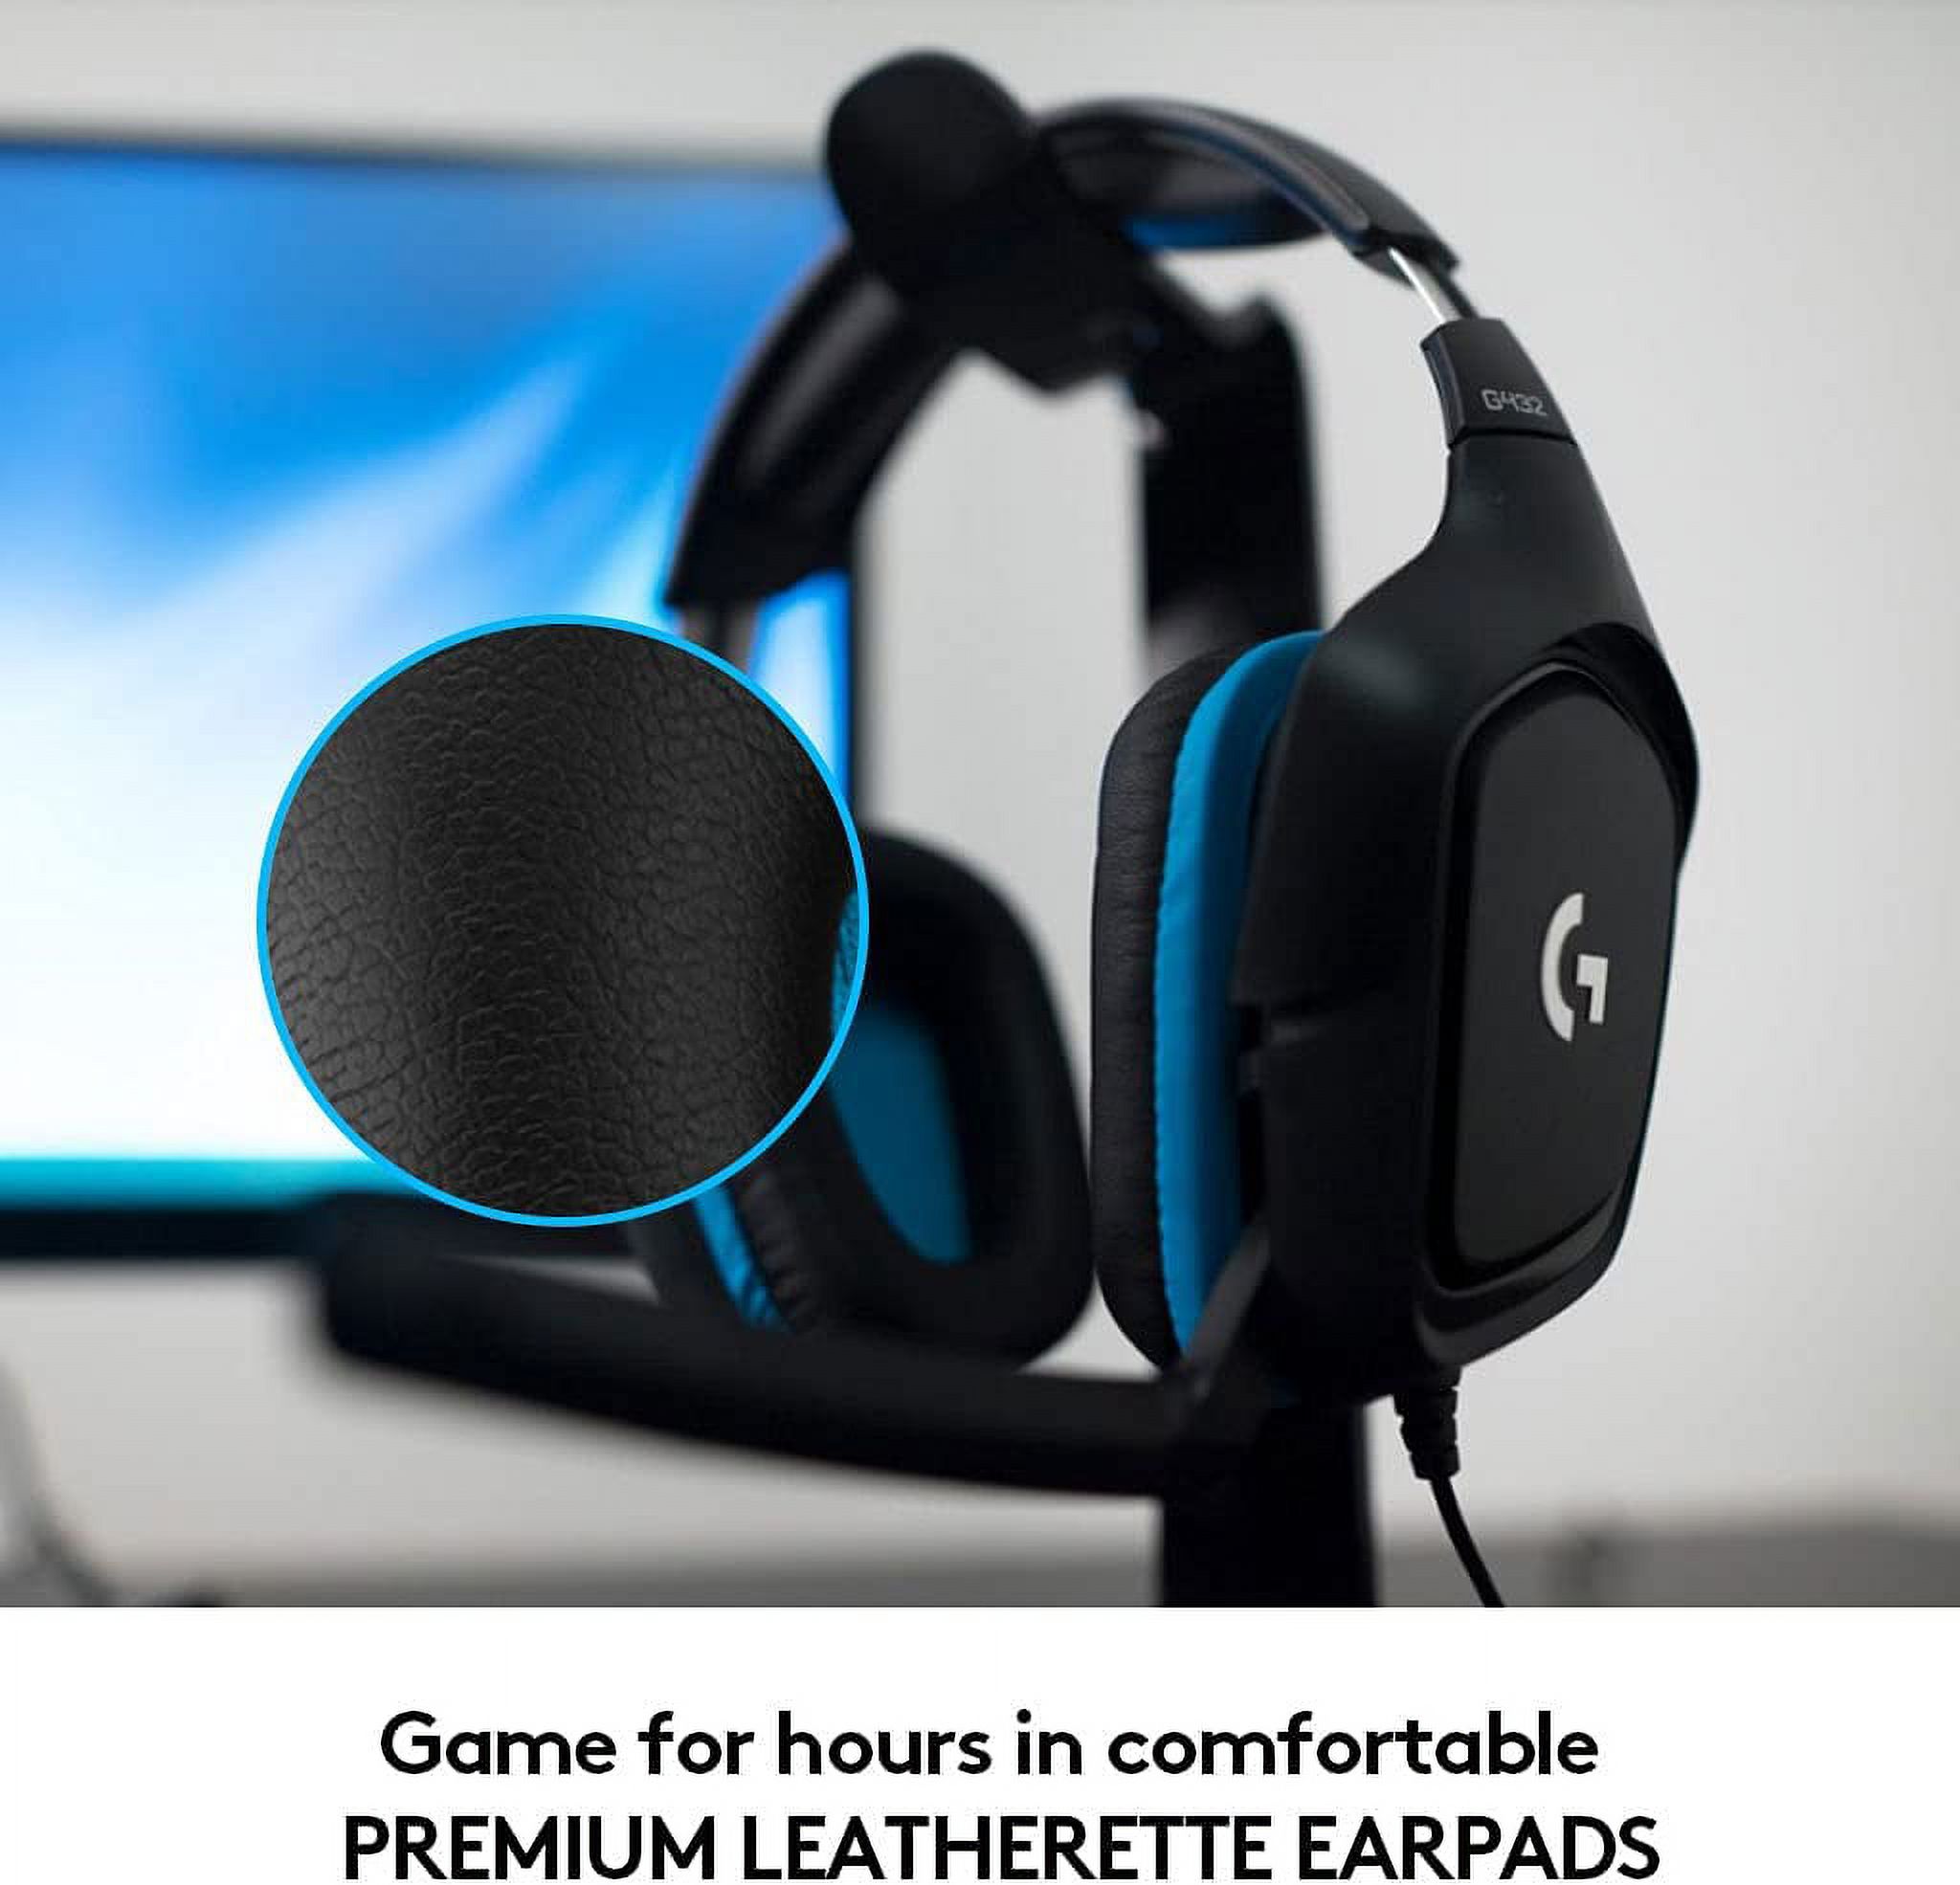 Logitech G432 Wired Gaming Headset, 7.1 Surround Sound, USB and 3.5 mm Jack, Black - image 4 of 7